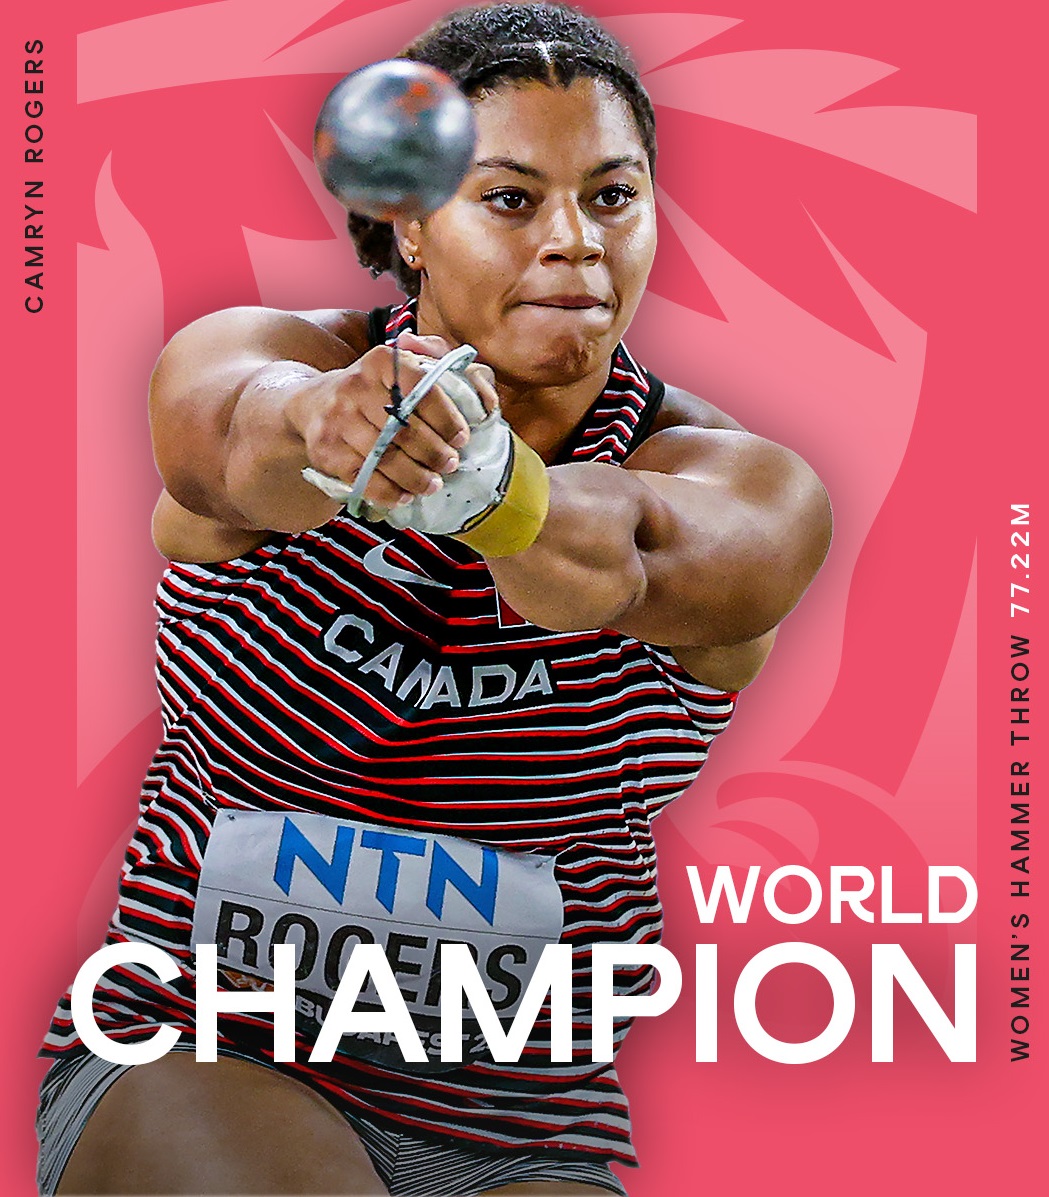 Canada’s Camryn Rogers wins hammer throw world title at World Championship